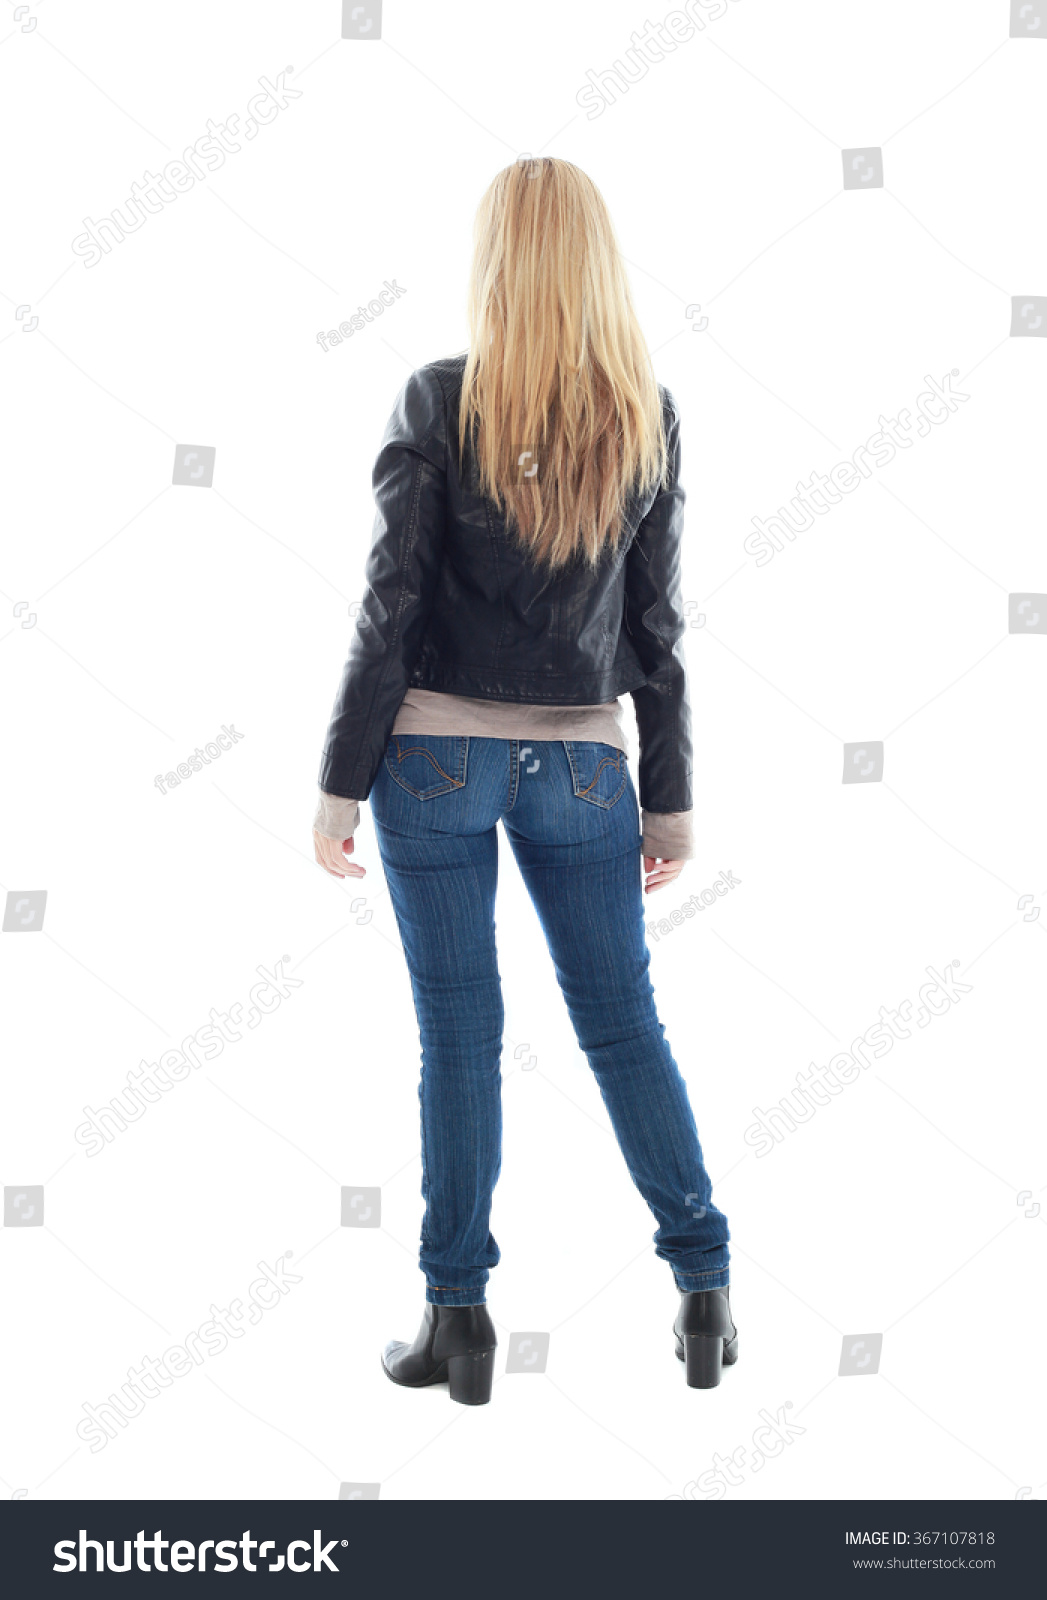 Beautiful Young Woman Long Blonde Hair Stock Photo Edit Now